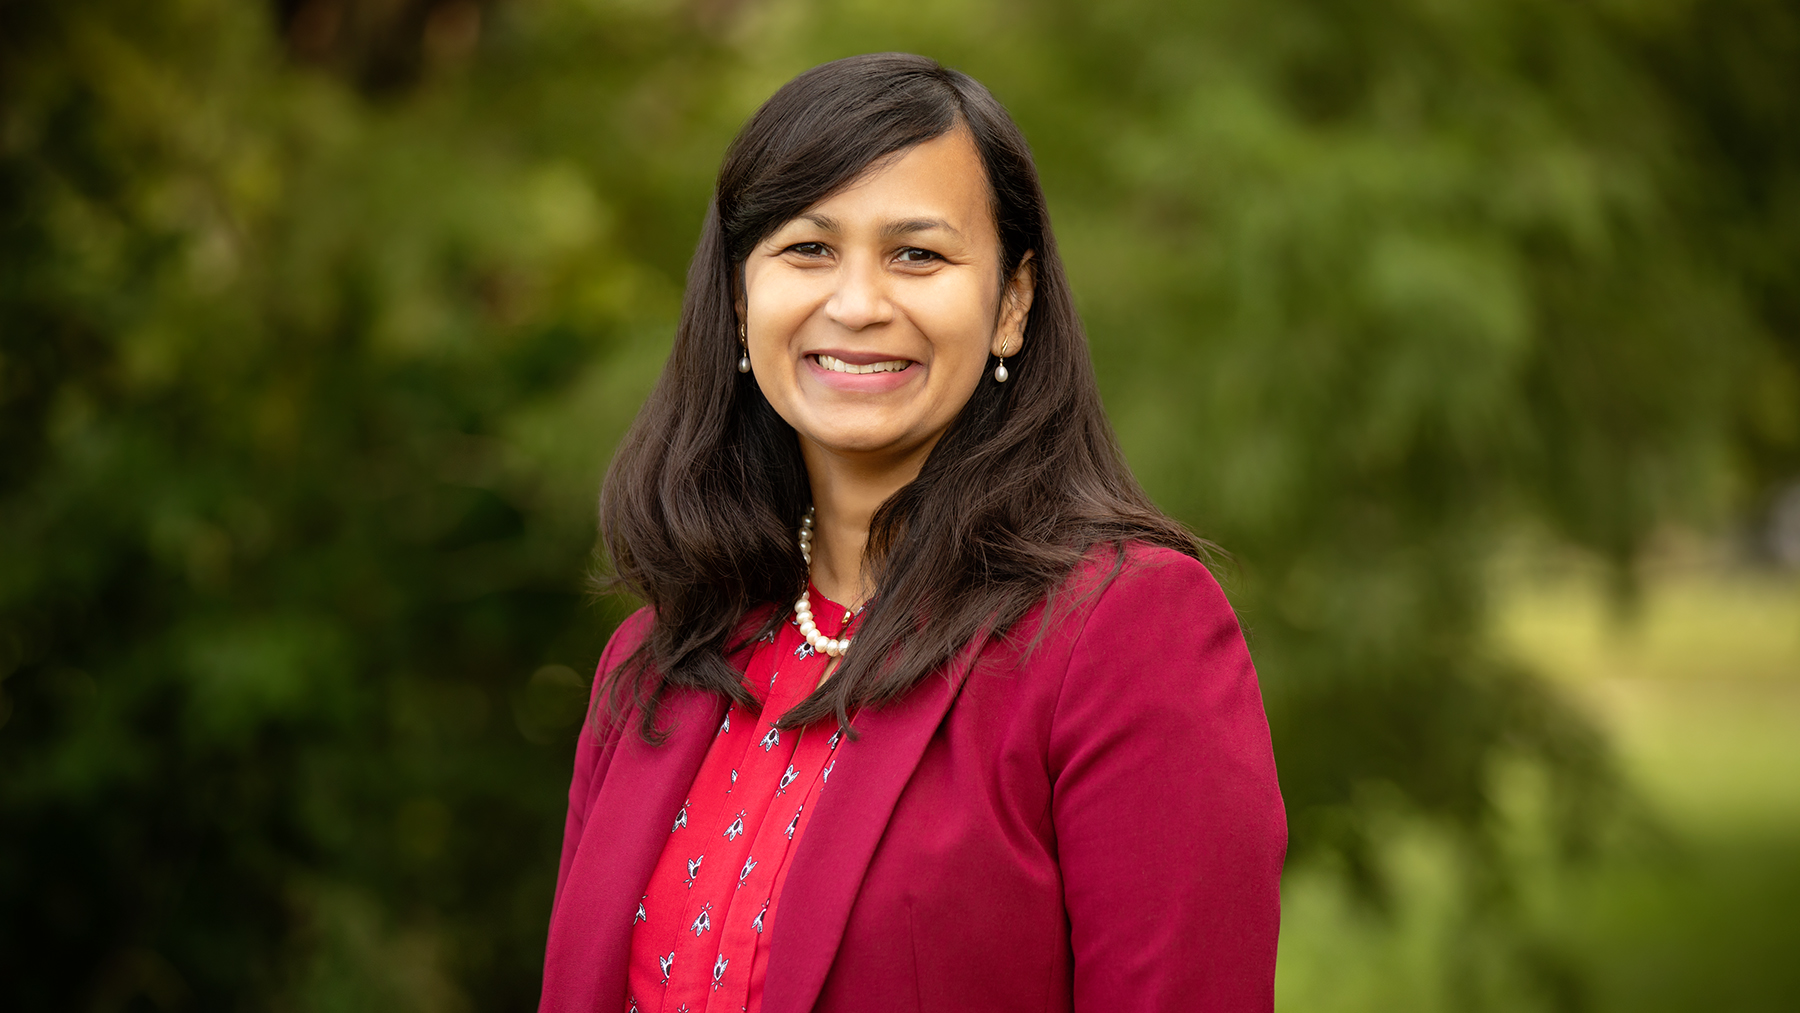 Aditi Das, Cancer Center at Illinois (CCIL) researcher and associate professor at the Center for Biophysics and Quantitative Biology, is seeking to uncover the basic science of cannabinoids, natural compounds found in the cannabis plant.